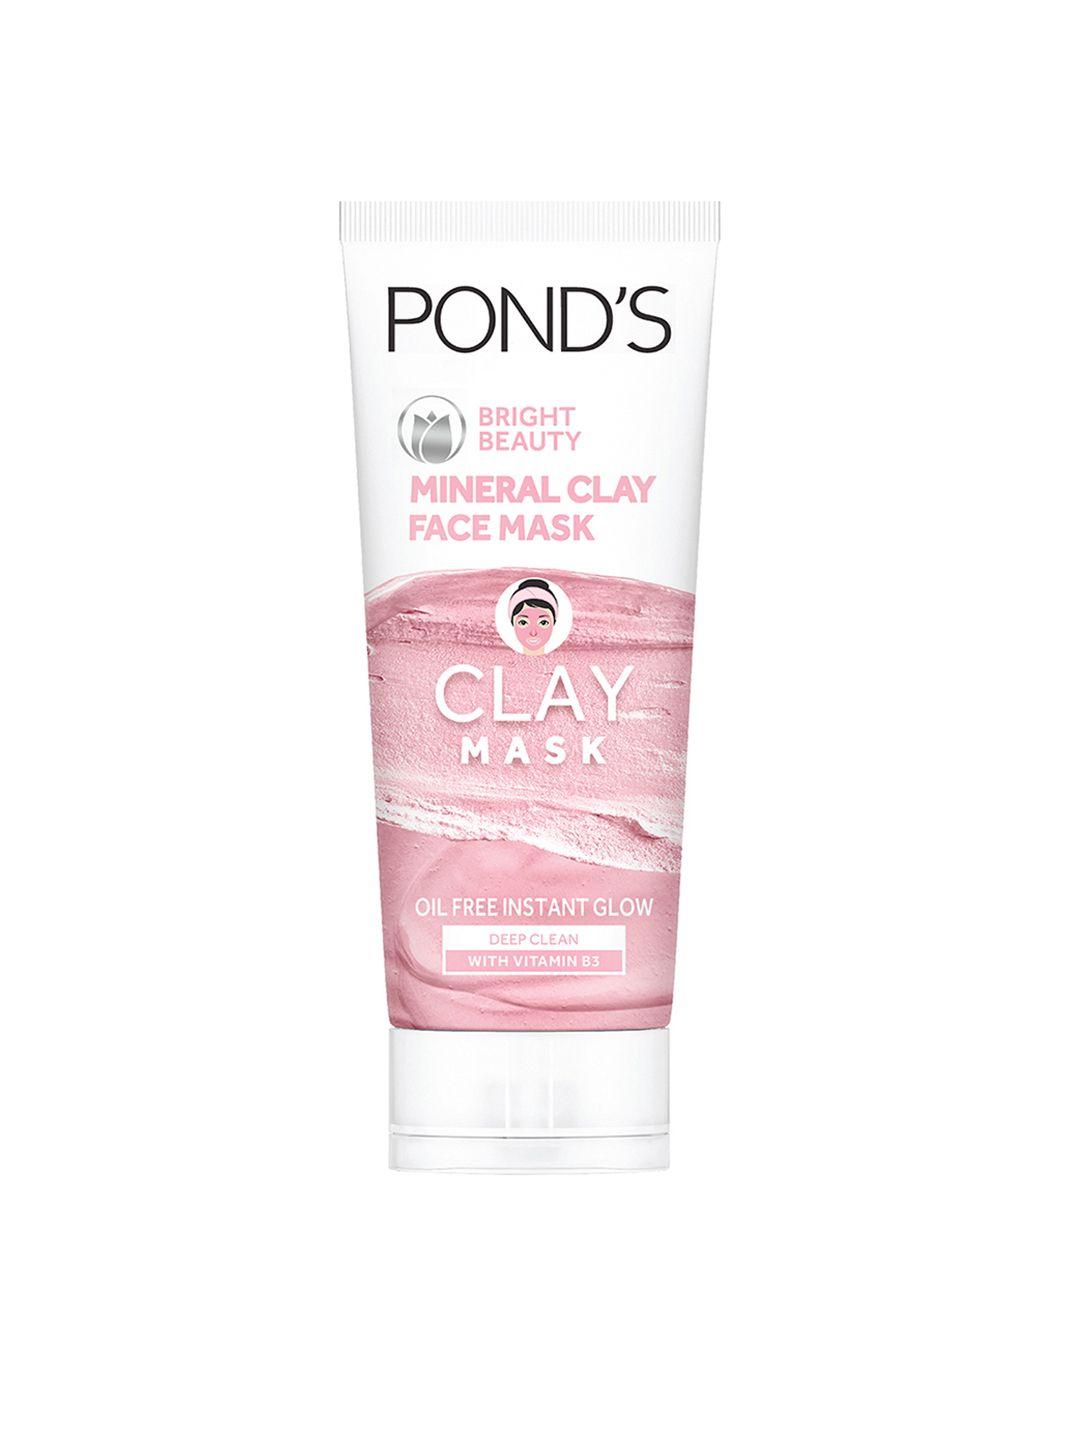 Ponds Bright Beauty Mineral Clay Face Mask For Oil Free Instant Glow - 90 g